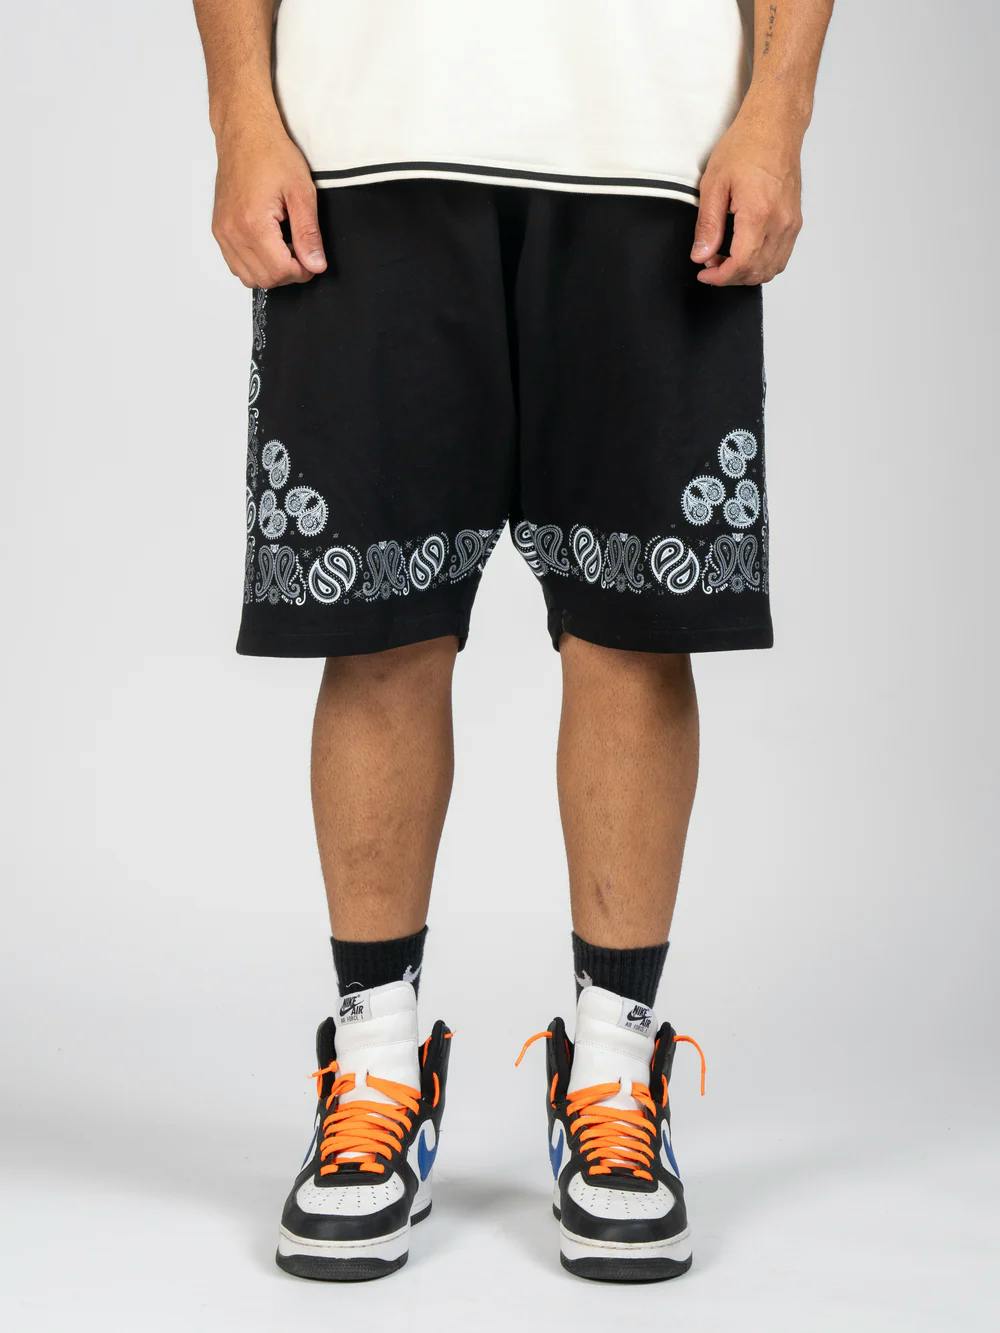 Black Paisley Outline Shorts, a product by TOFFLE